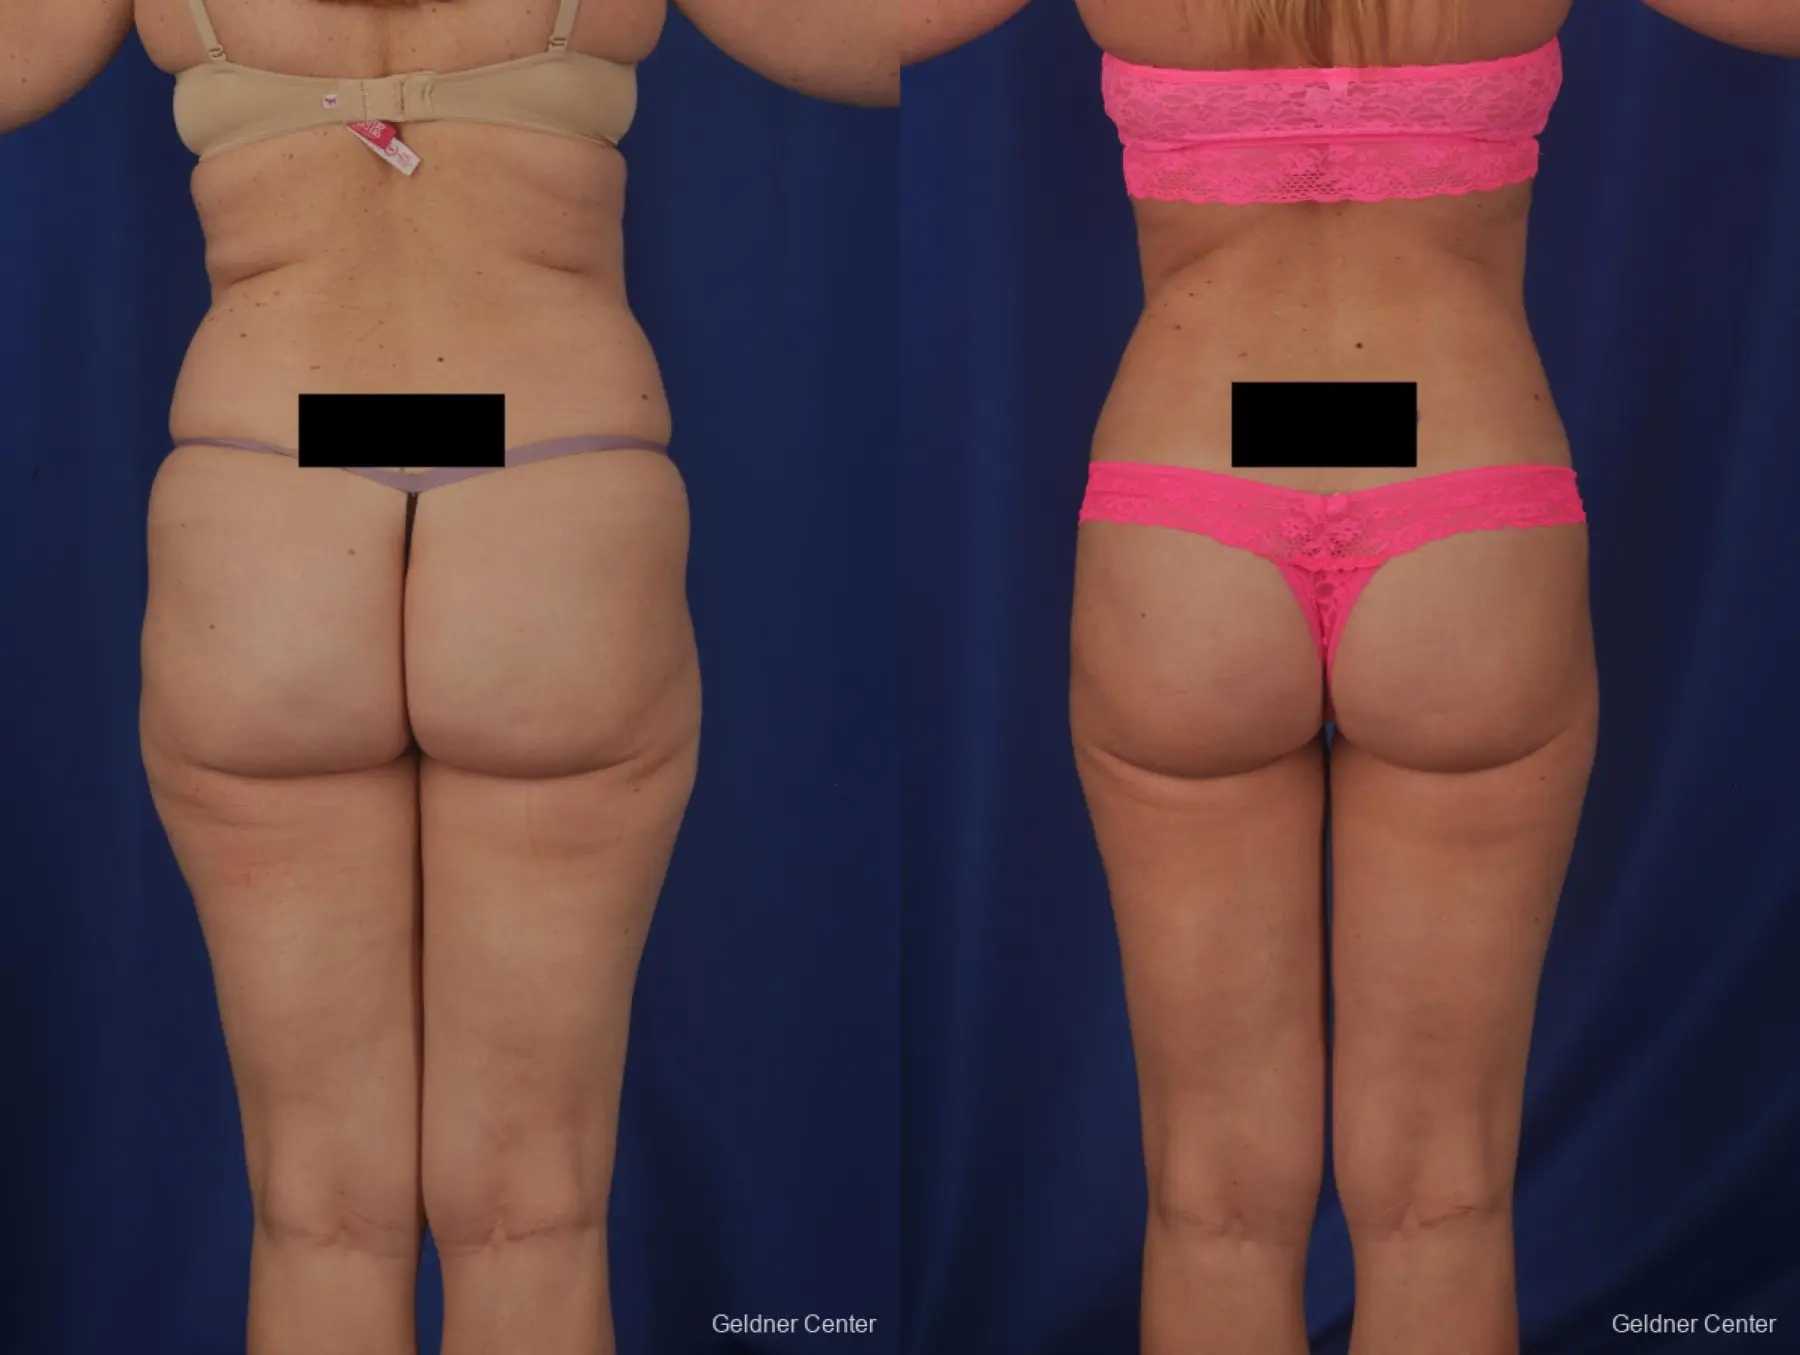 Vaser lipo patient 2069 before and after photos - Before and After 3